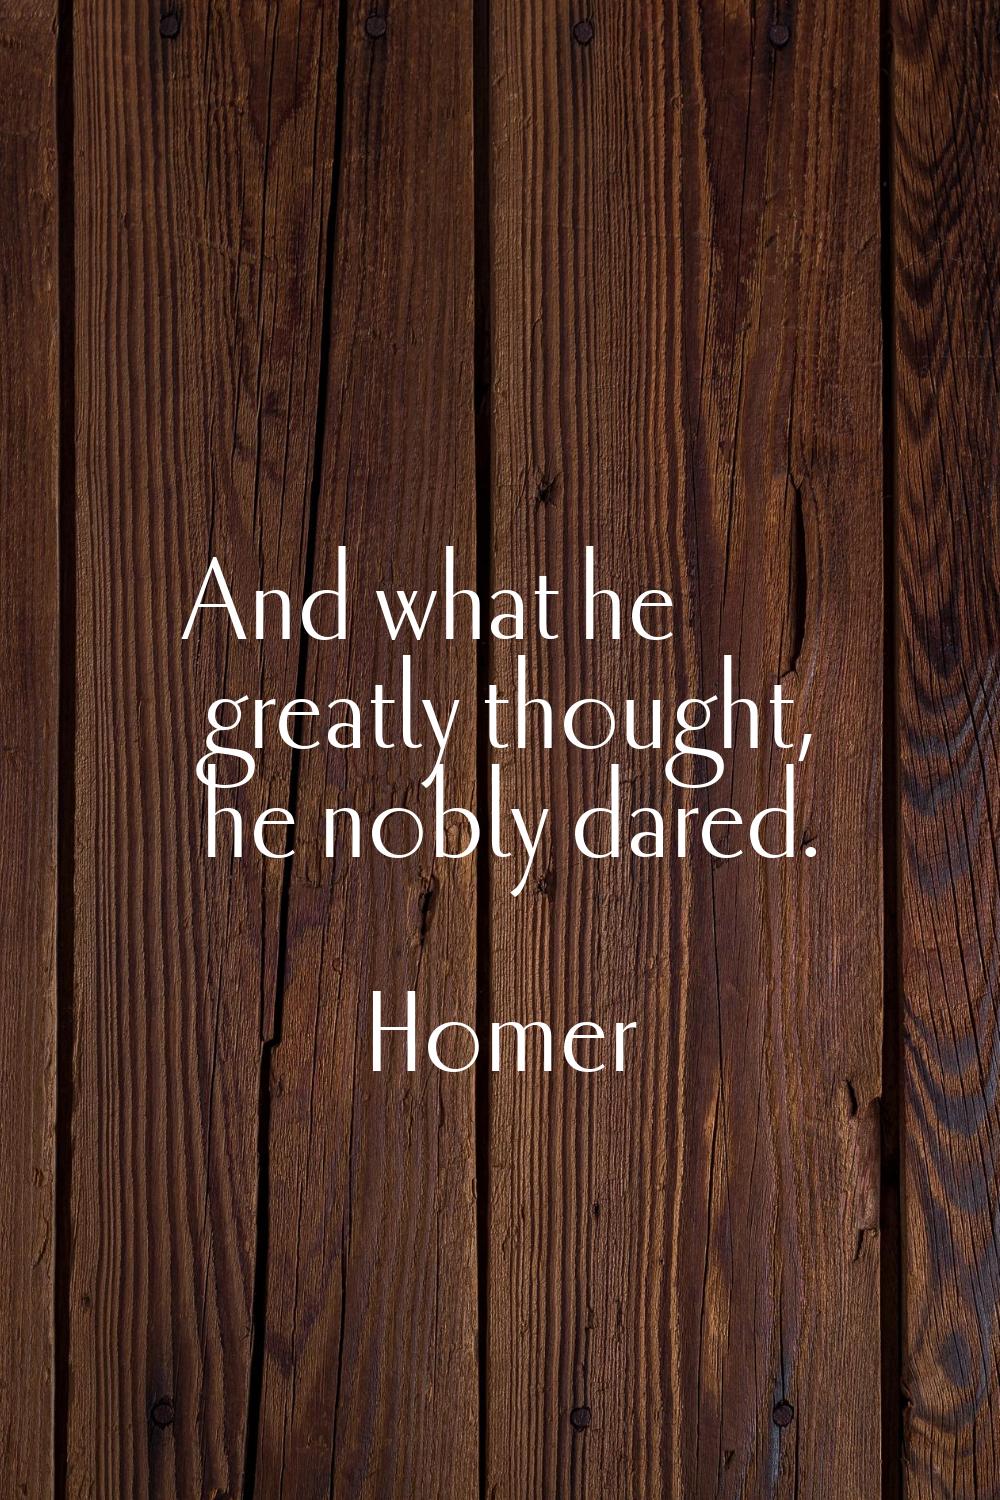 And what he greatly thought, he nobly dared.